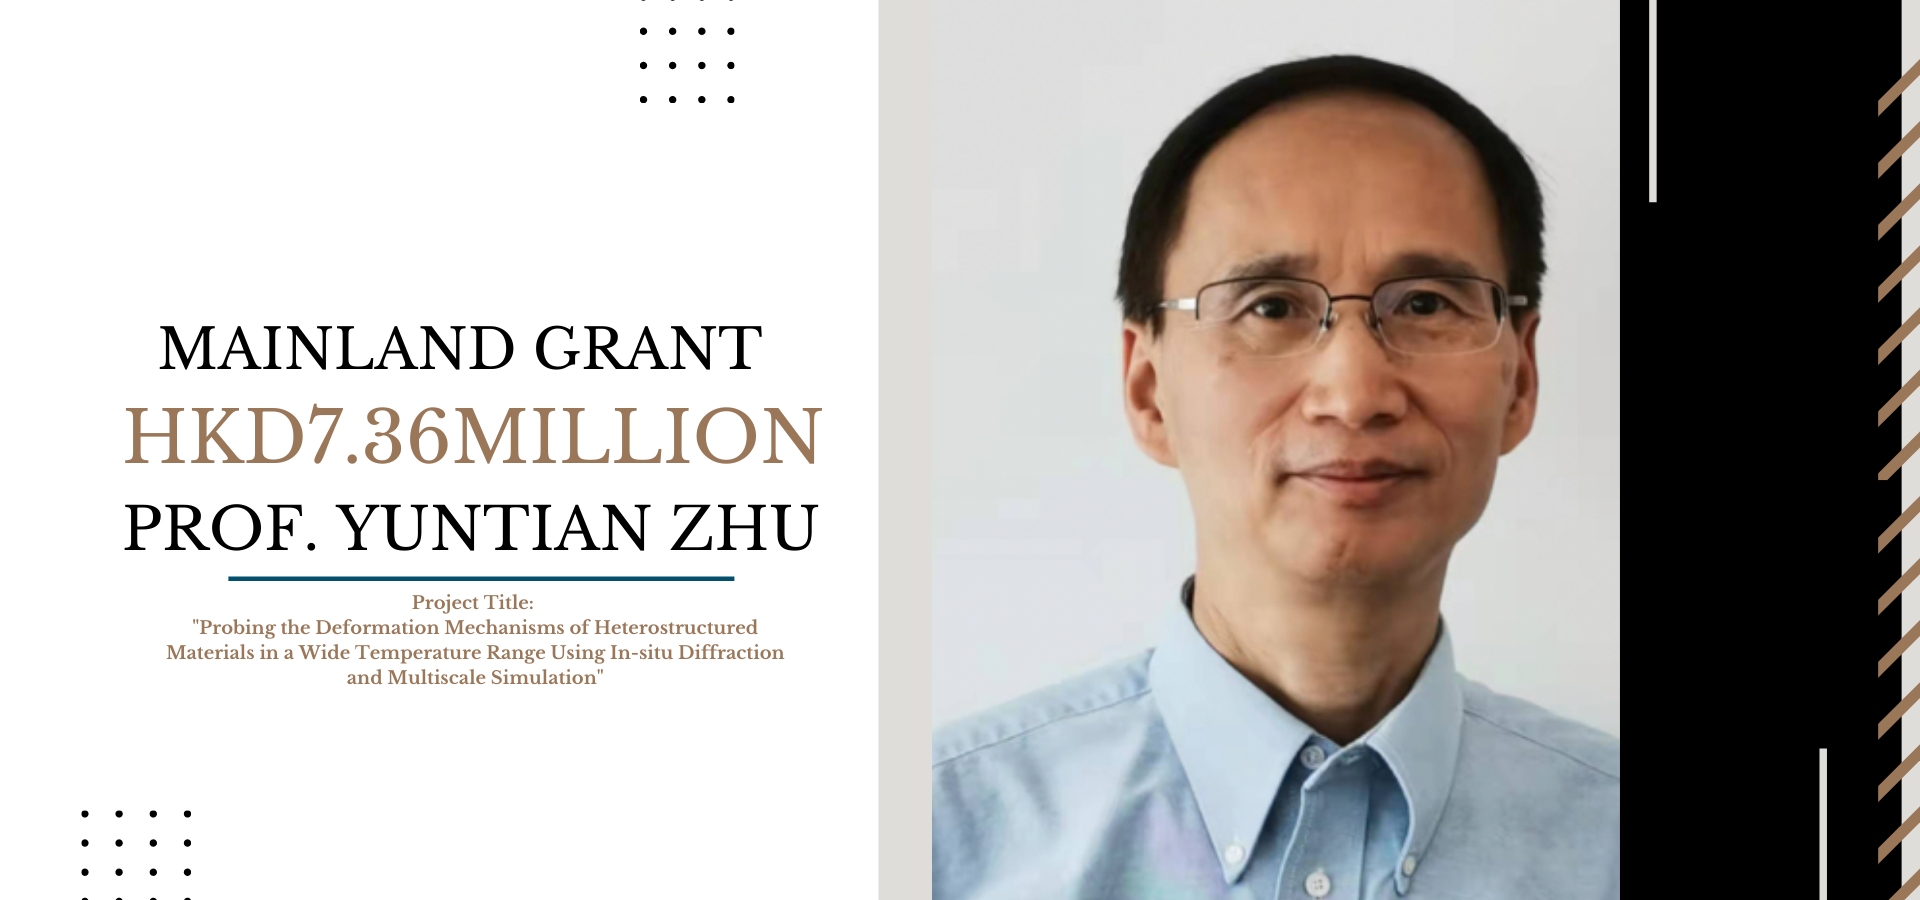 Prof. Yuntian Zhu’s team received a HK$7.36M Mainland Key Project Grant